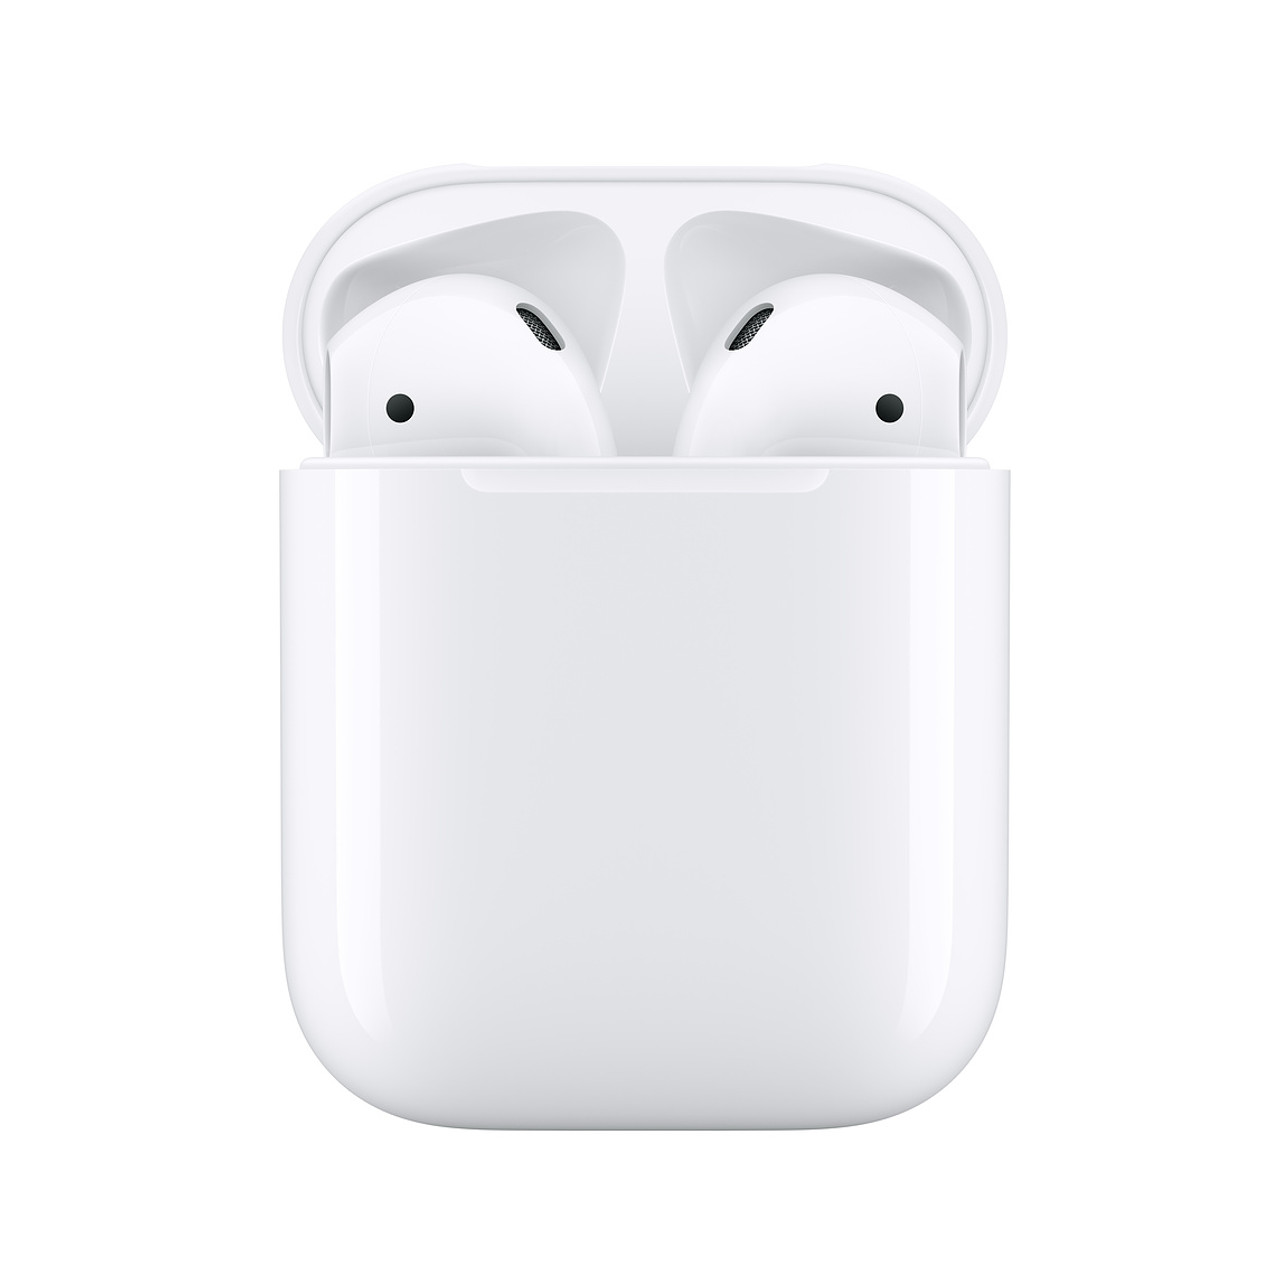 White Apple AirPods Pro Max Elevate Your Audio Experience, 2nd